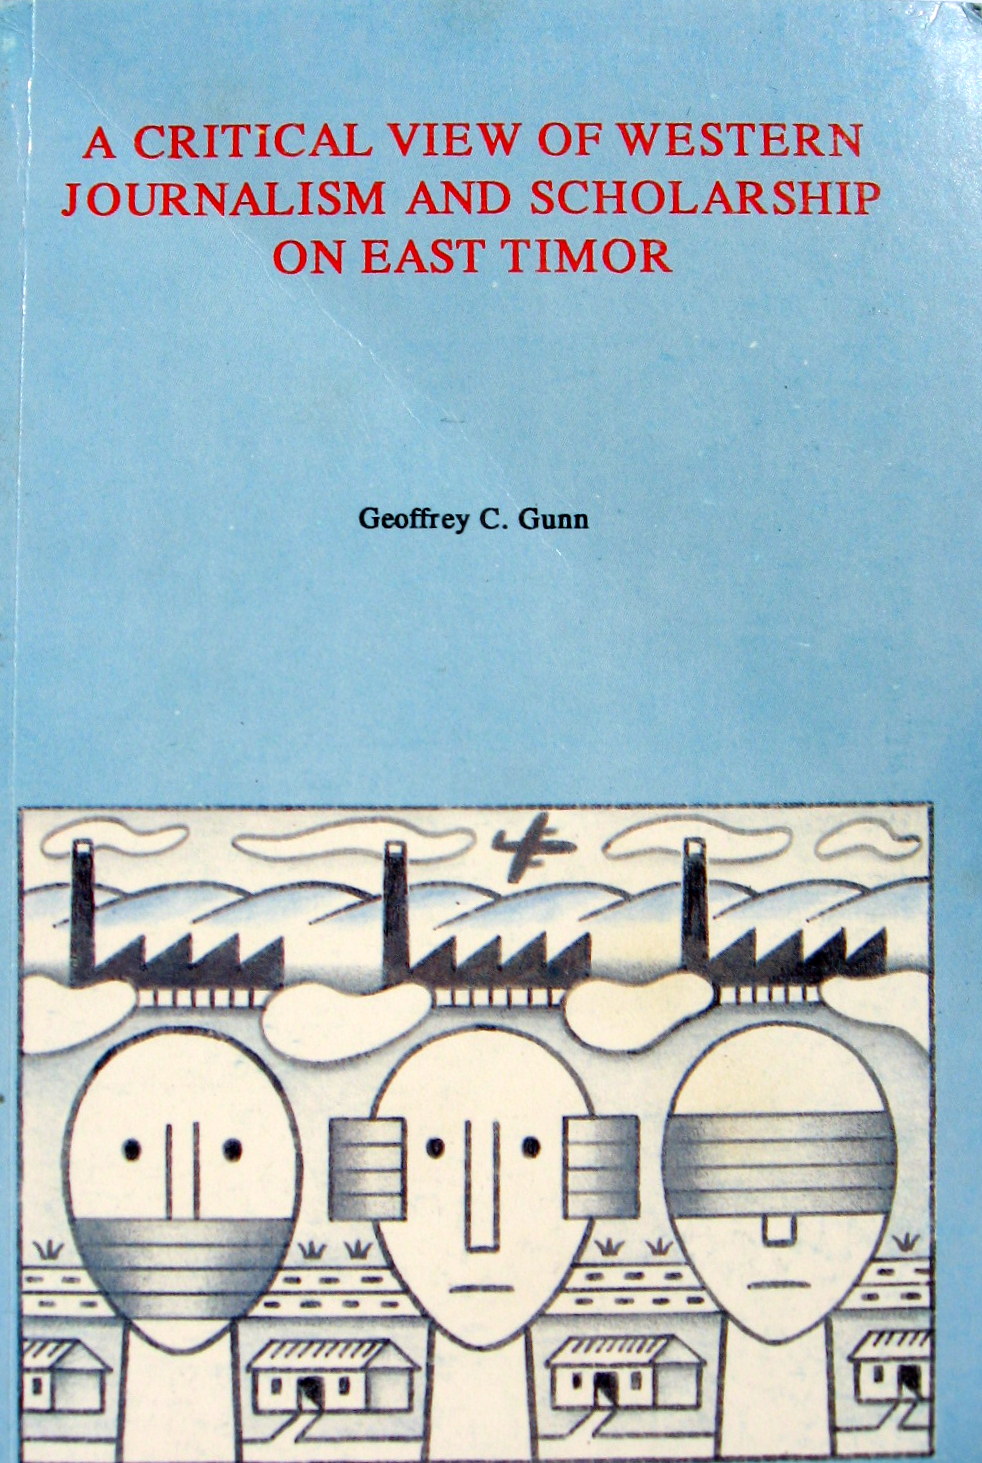 A Critical View of Western Journalism and Scholarship on East Timor